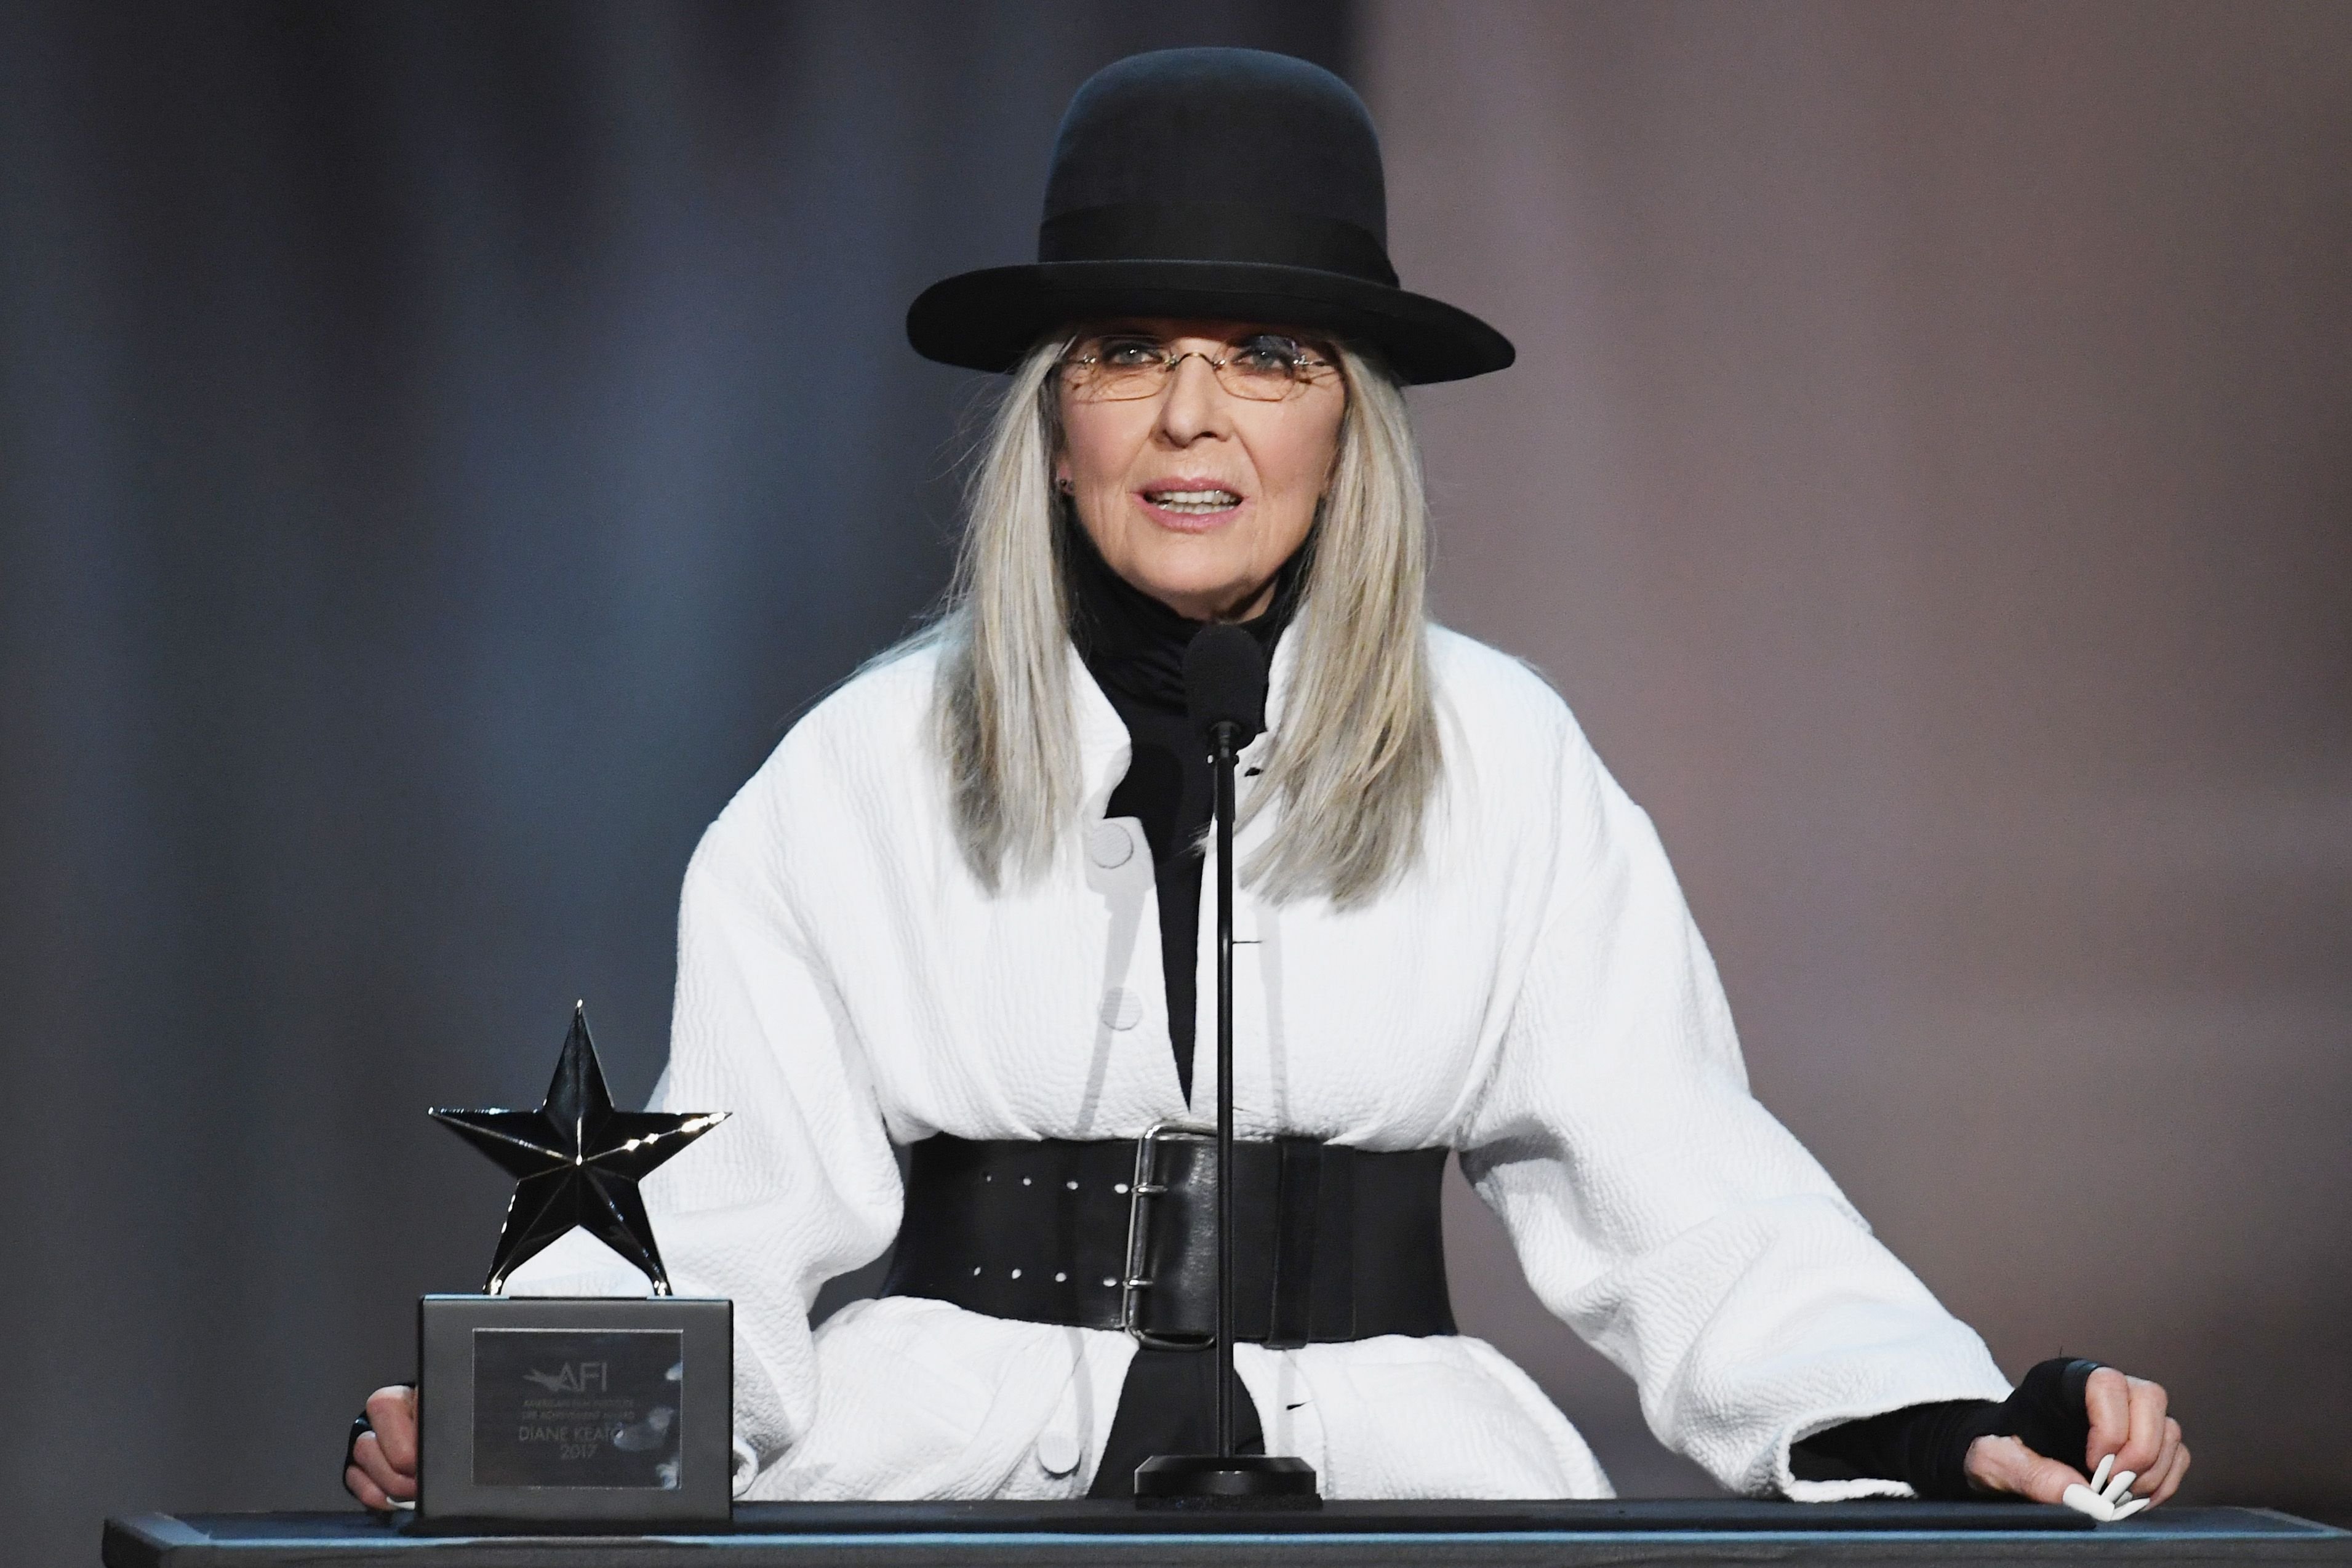 Diane Keaton accepts the AFI Life Achievement Award at the American Film Institute's 45th Life Achievement Award Gala Tribute to Diane Keaton in Hollywood in 2017 | Source: Getty Images